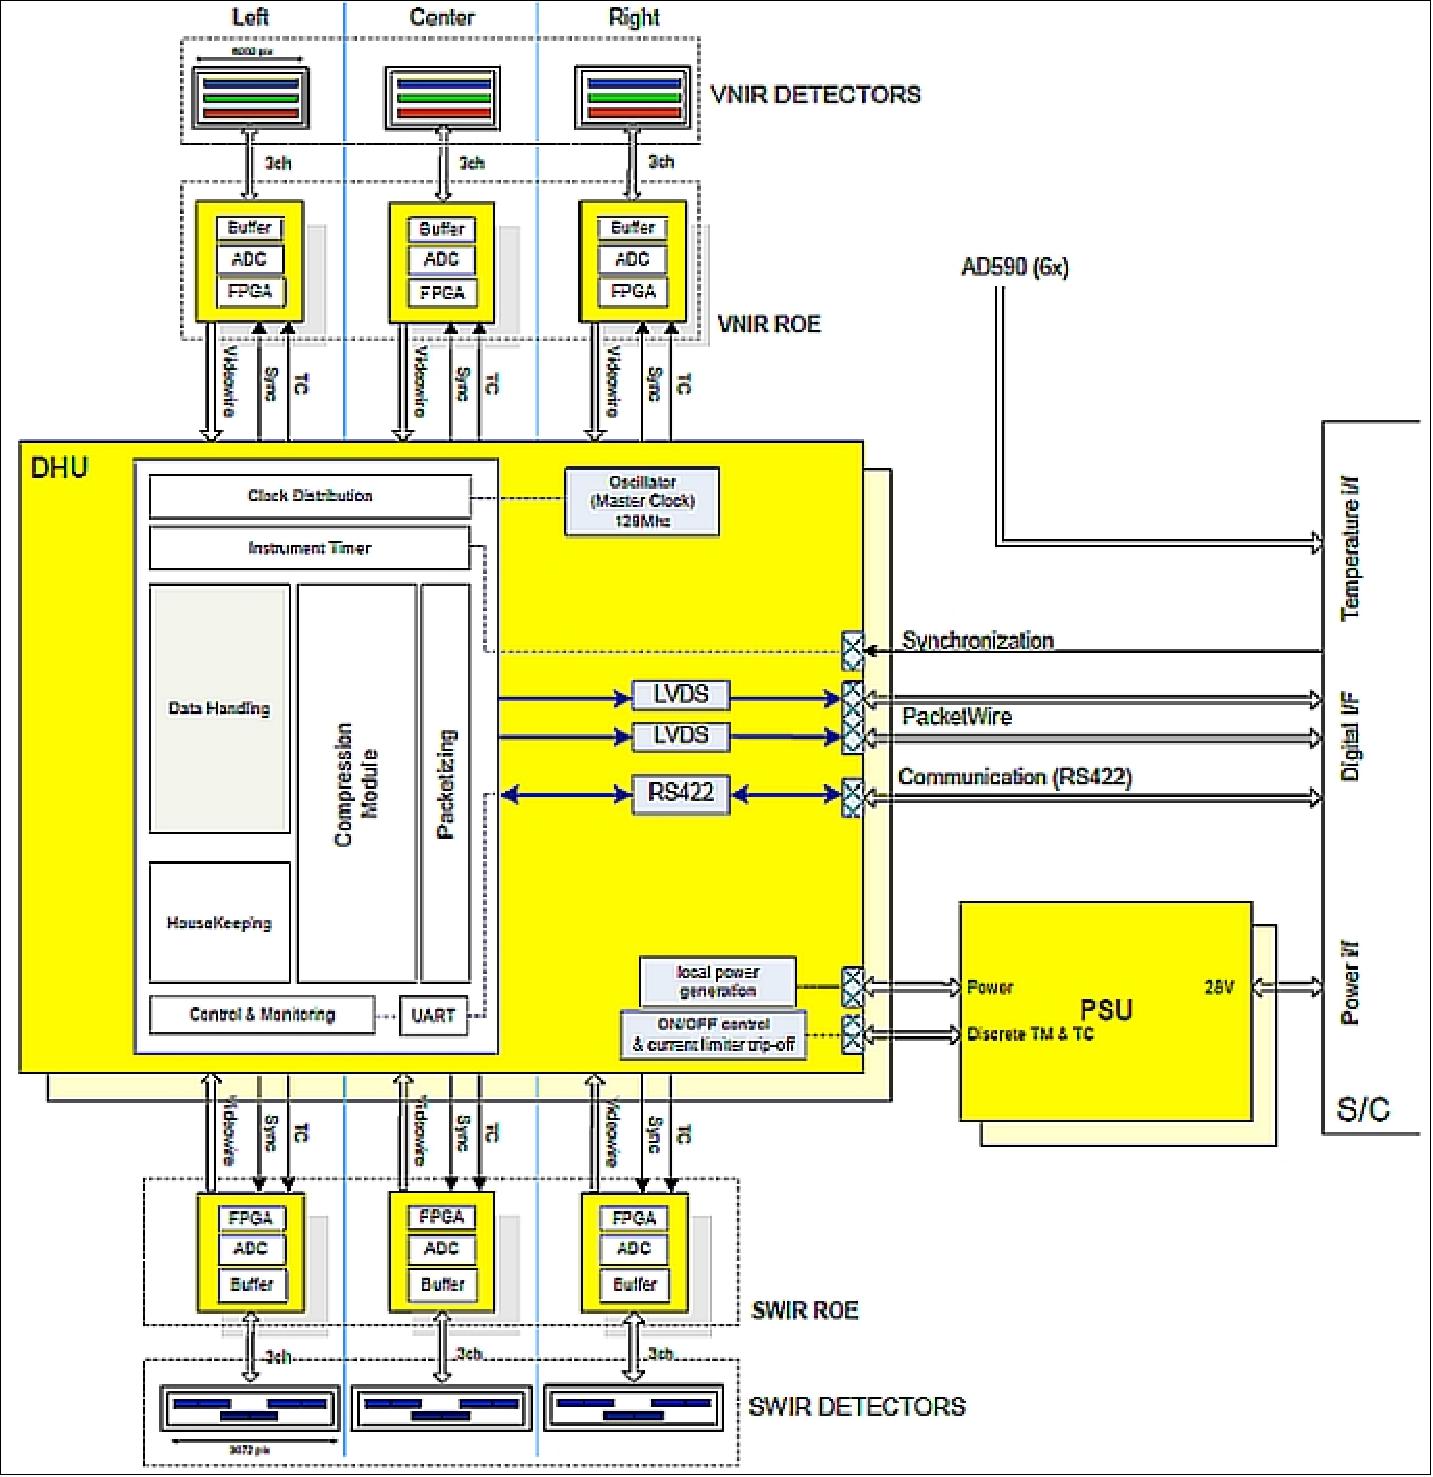 Figure 76: Architectural layout of the electronics design (image credit: OIP, ESA)